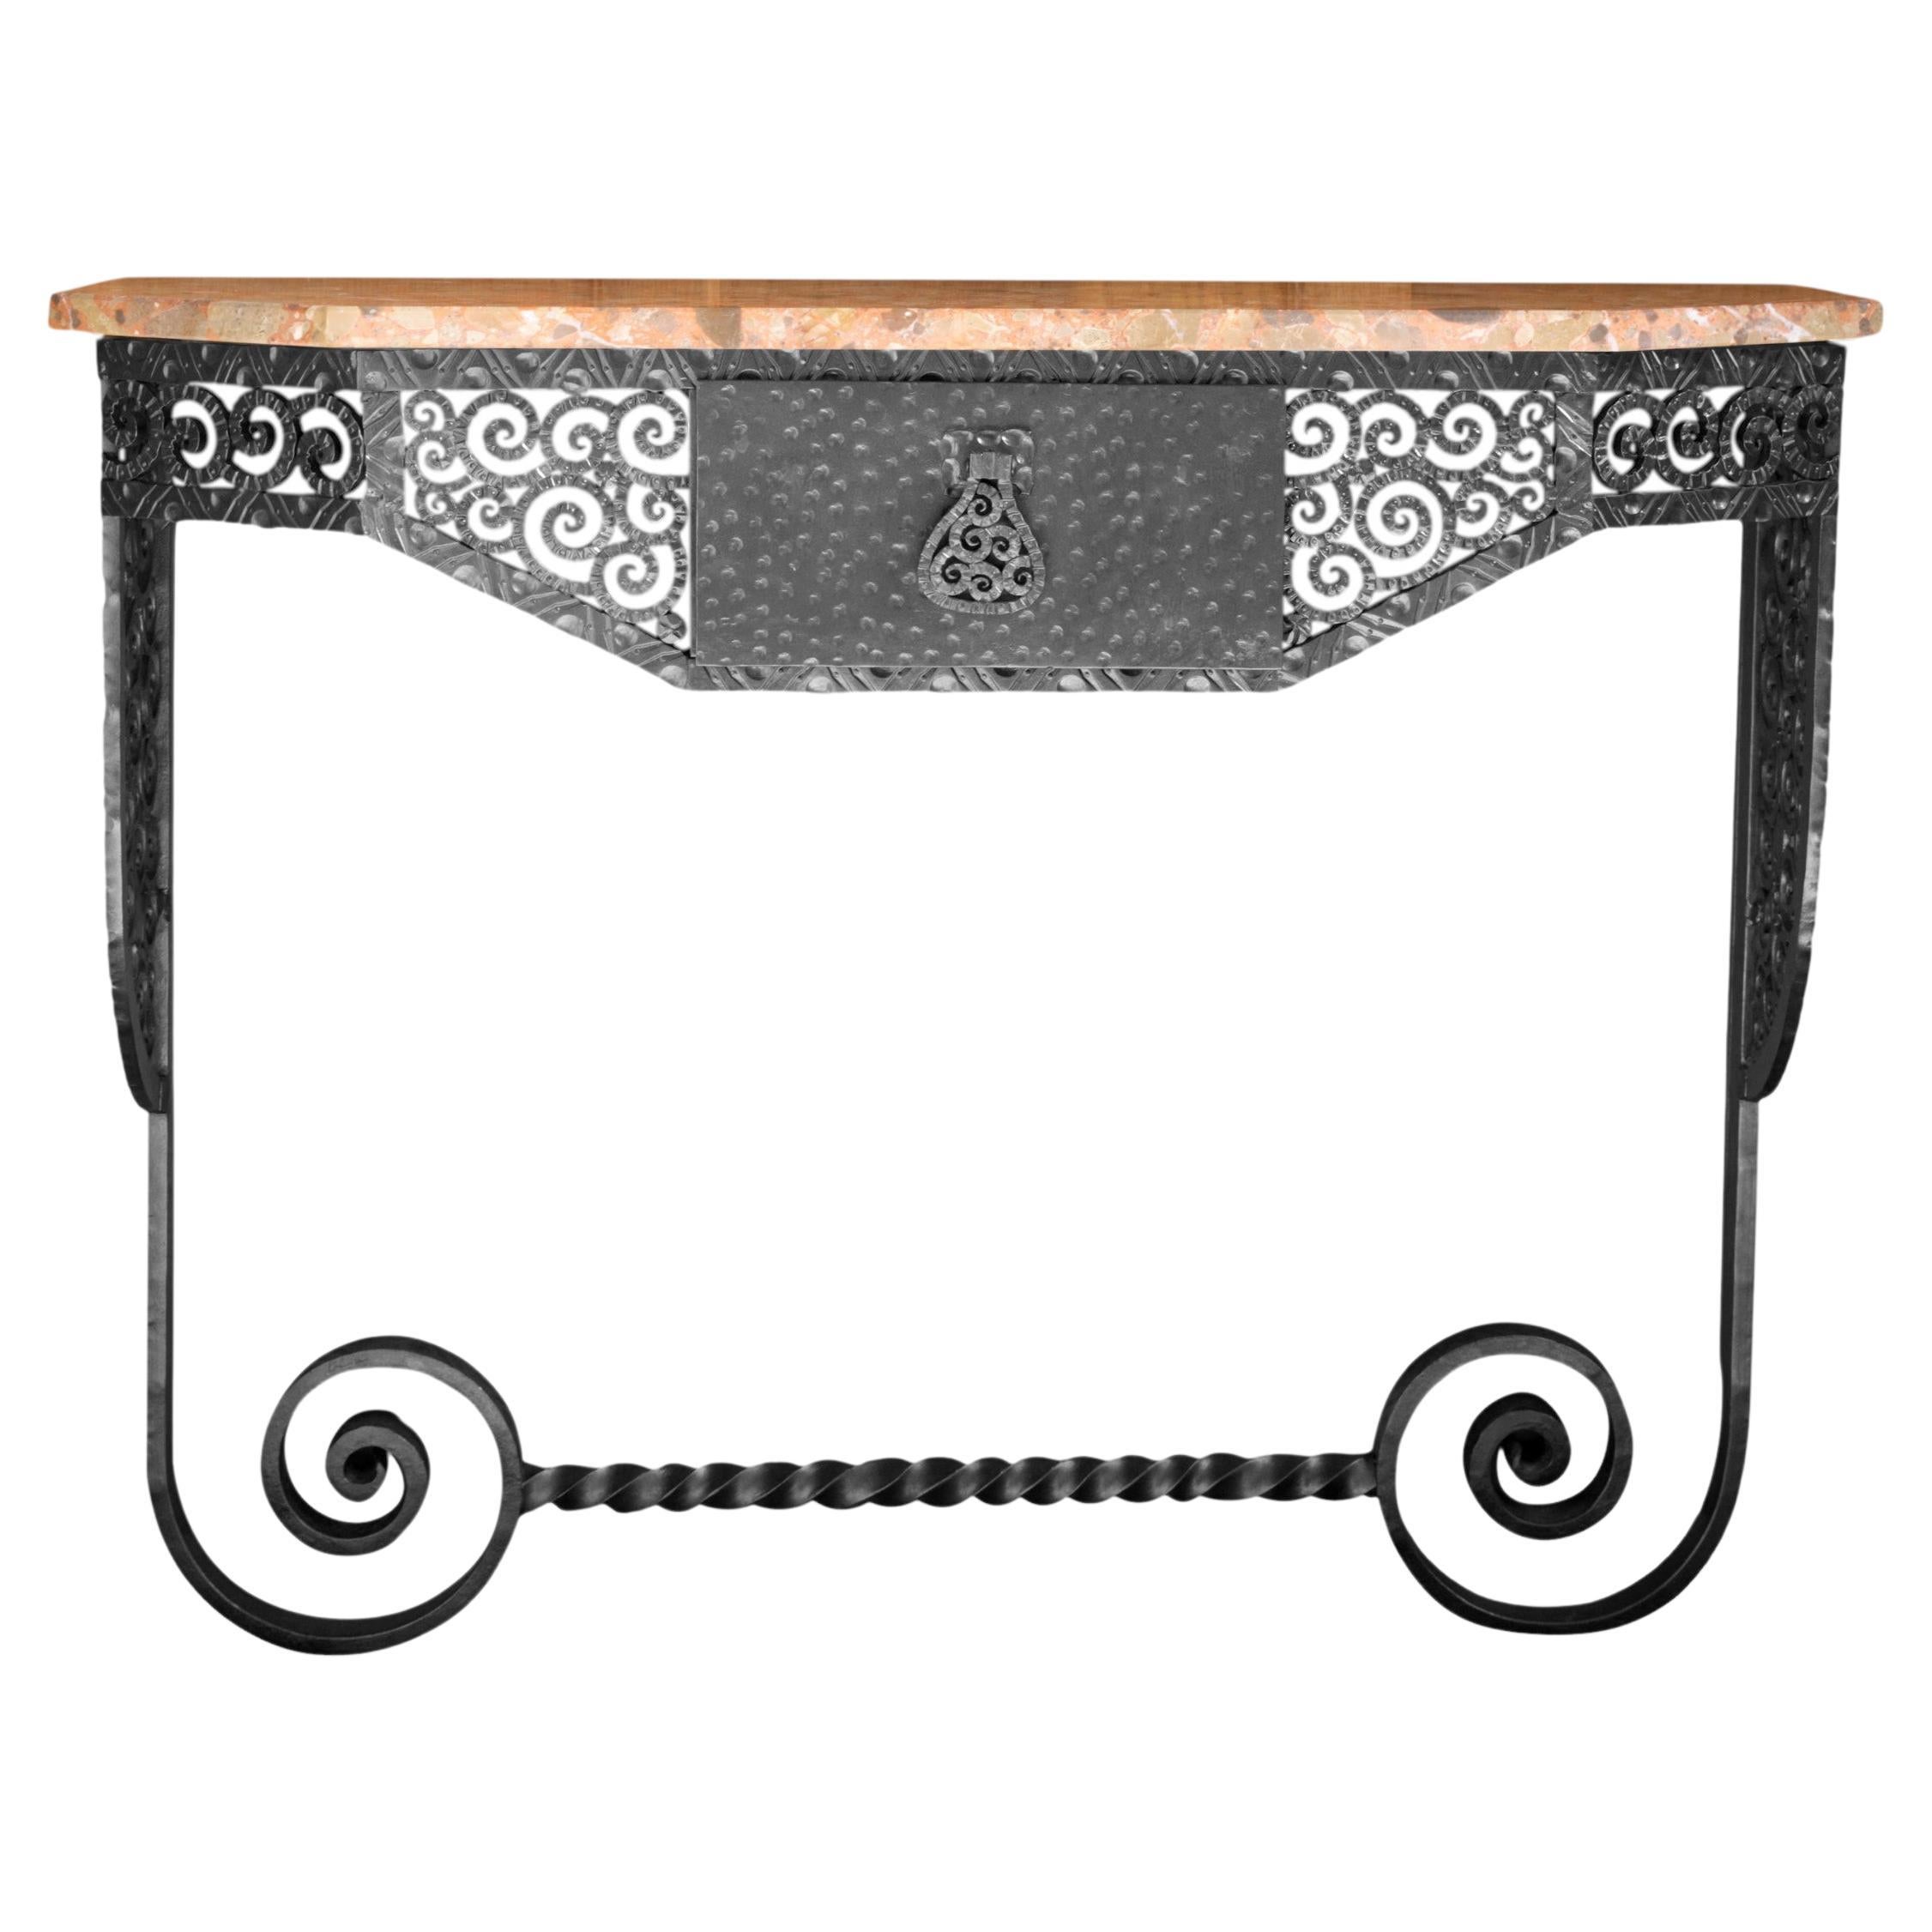 PAUL KISS French Art Deco Wrought-iron Console, 1920s For Sale